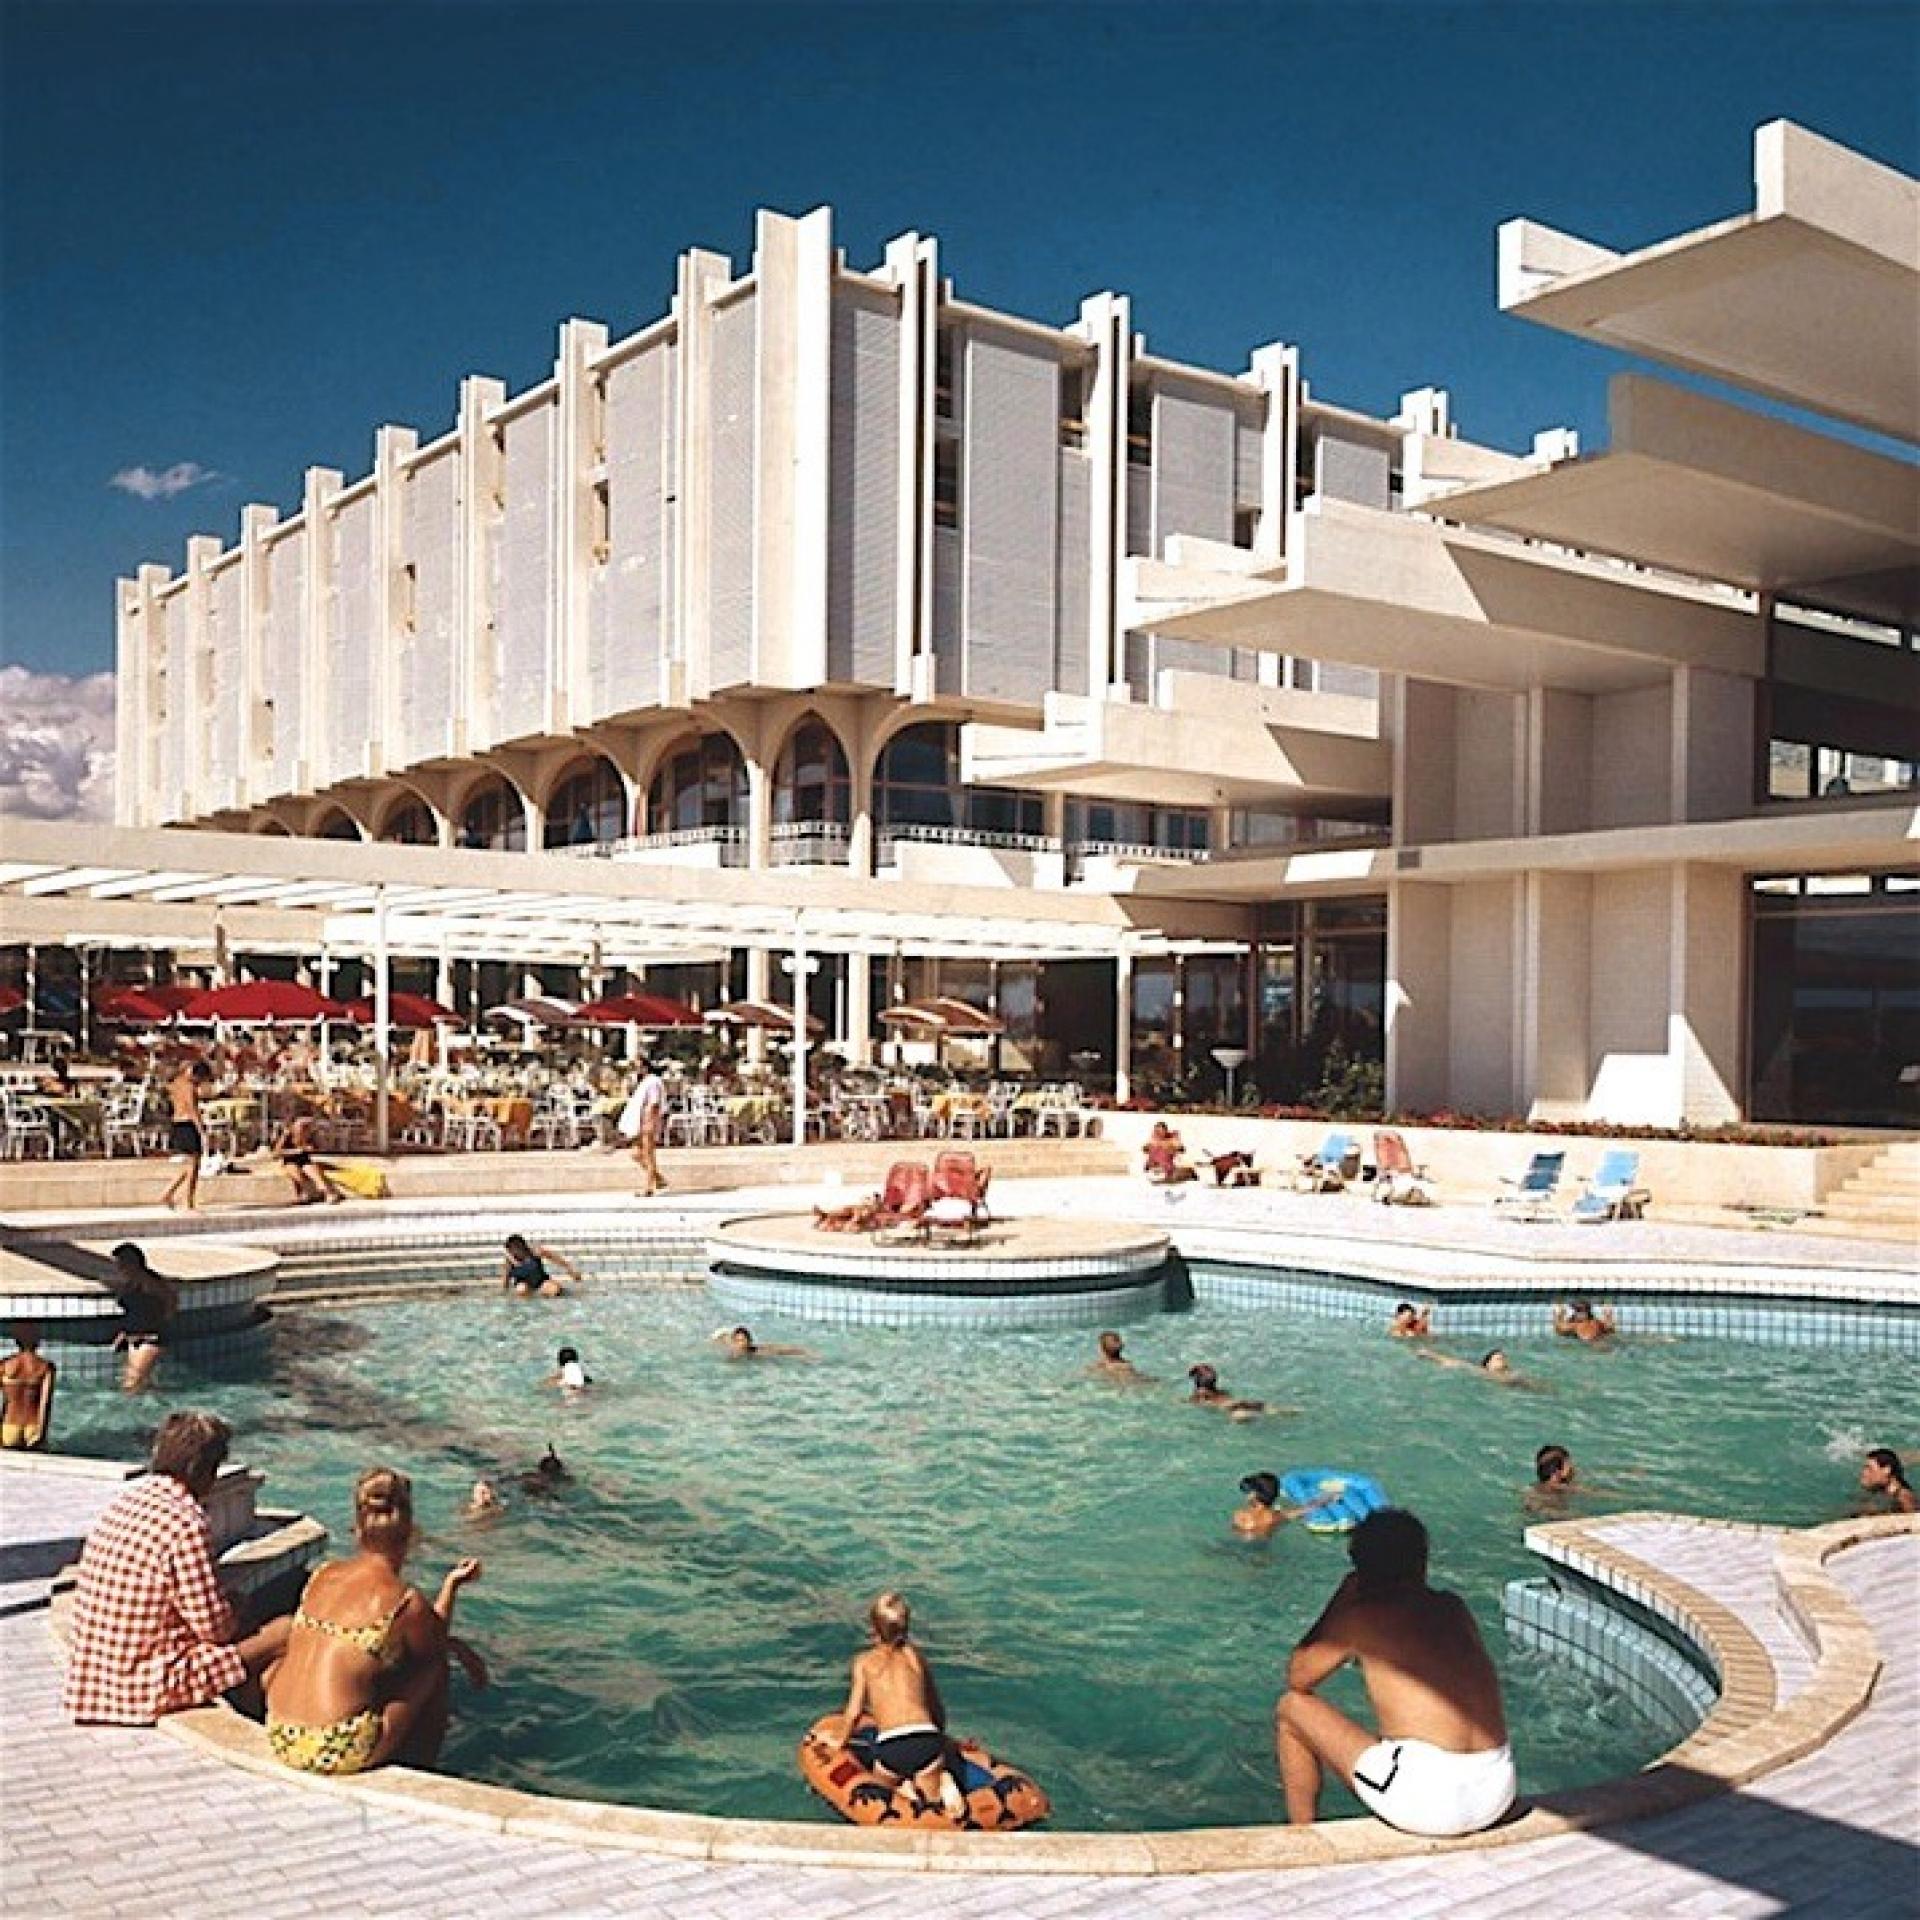 The Haludovo Palace, an ensemble of various architectural typologies from modern to postmodern as a new tendency in the region’s tourism architecture.